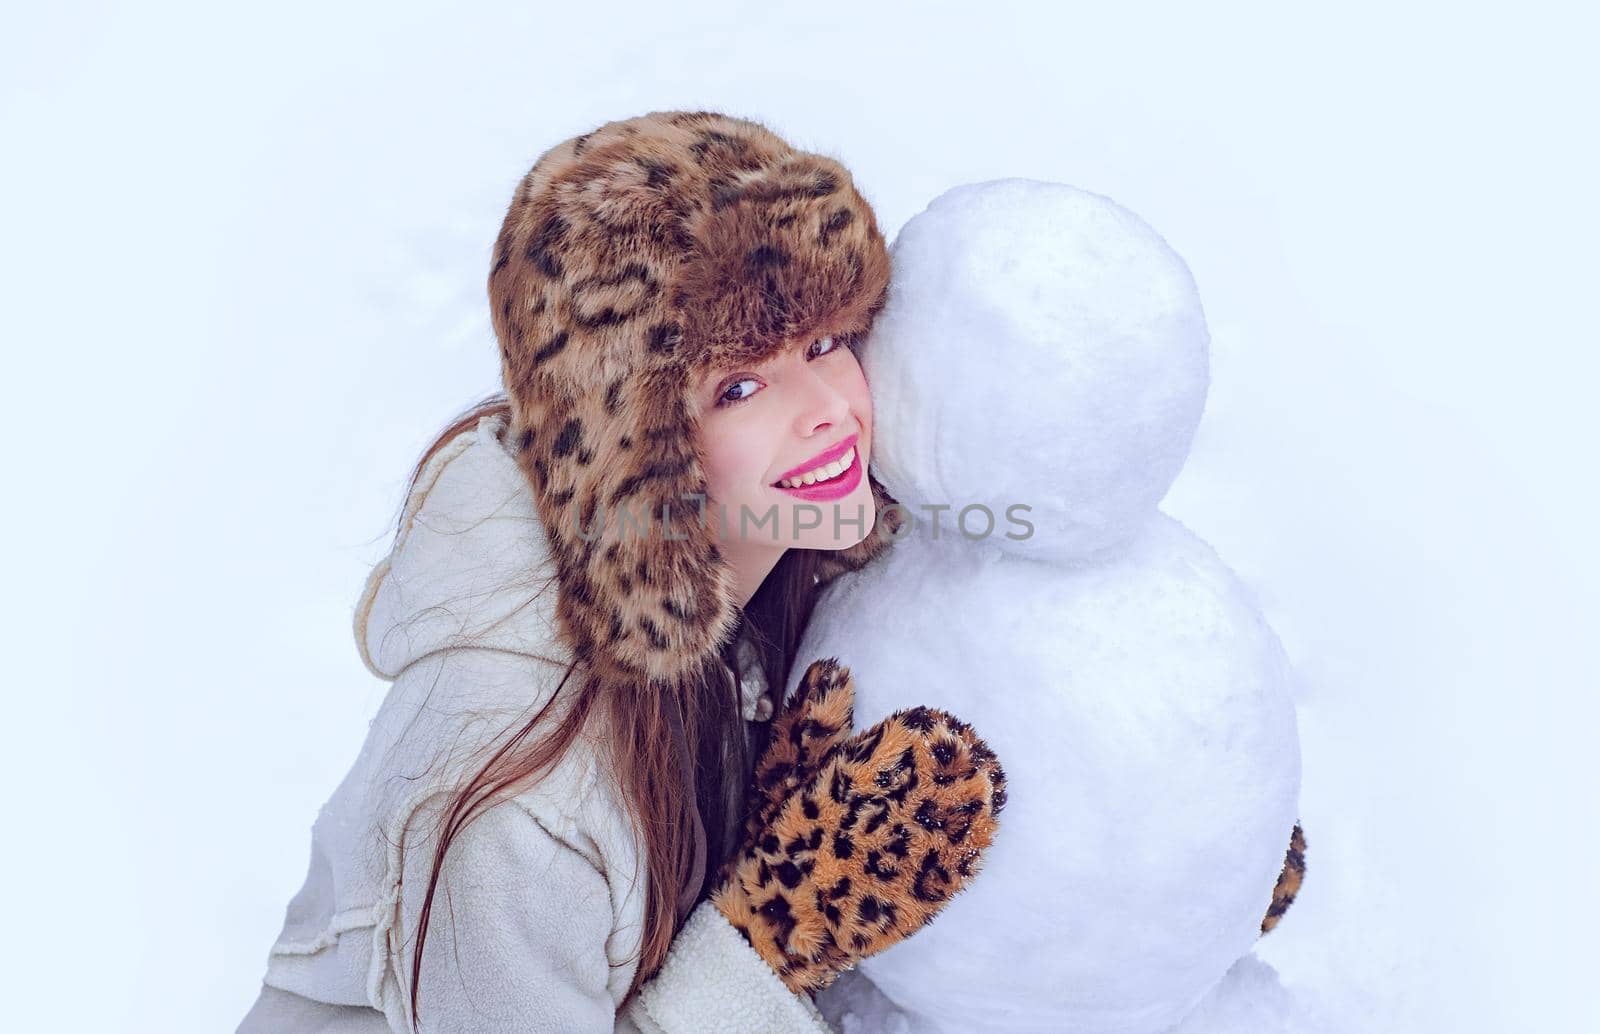 Winter woman. Winter girl making snowman. Happy girl playing with a snowman on a snowy winter walk. Winter emotion. Young woman winter portrait